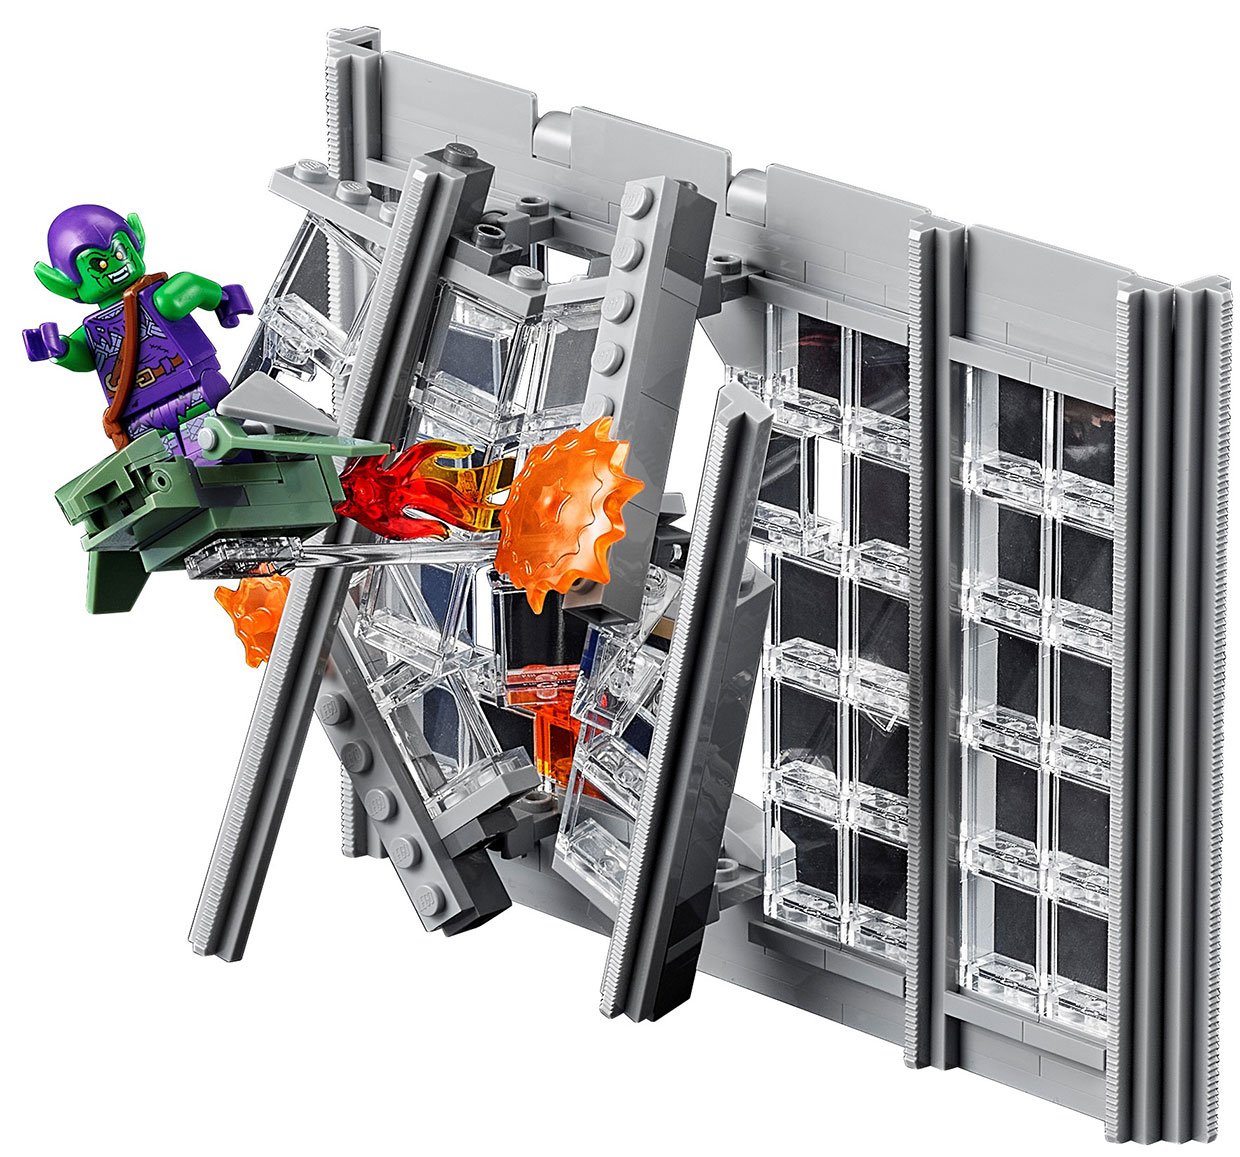 LEGO Spider-Man Daily Bugle Tower